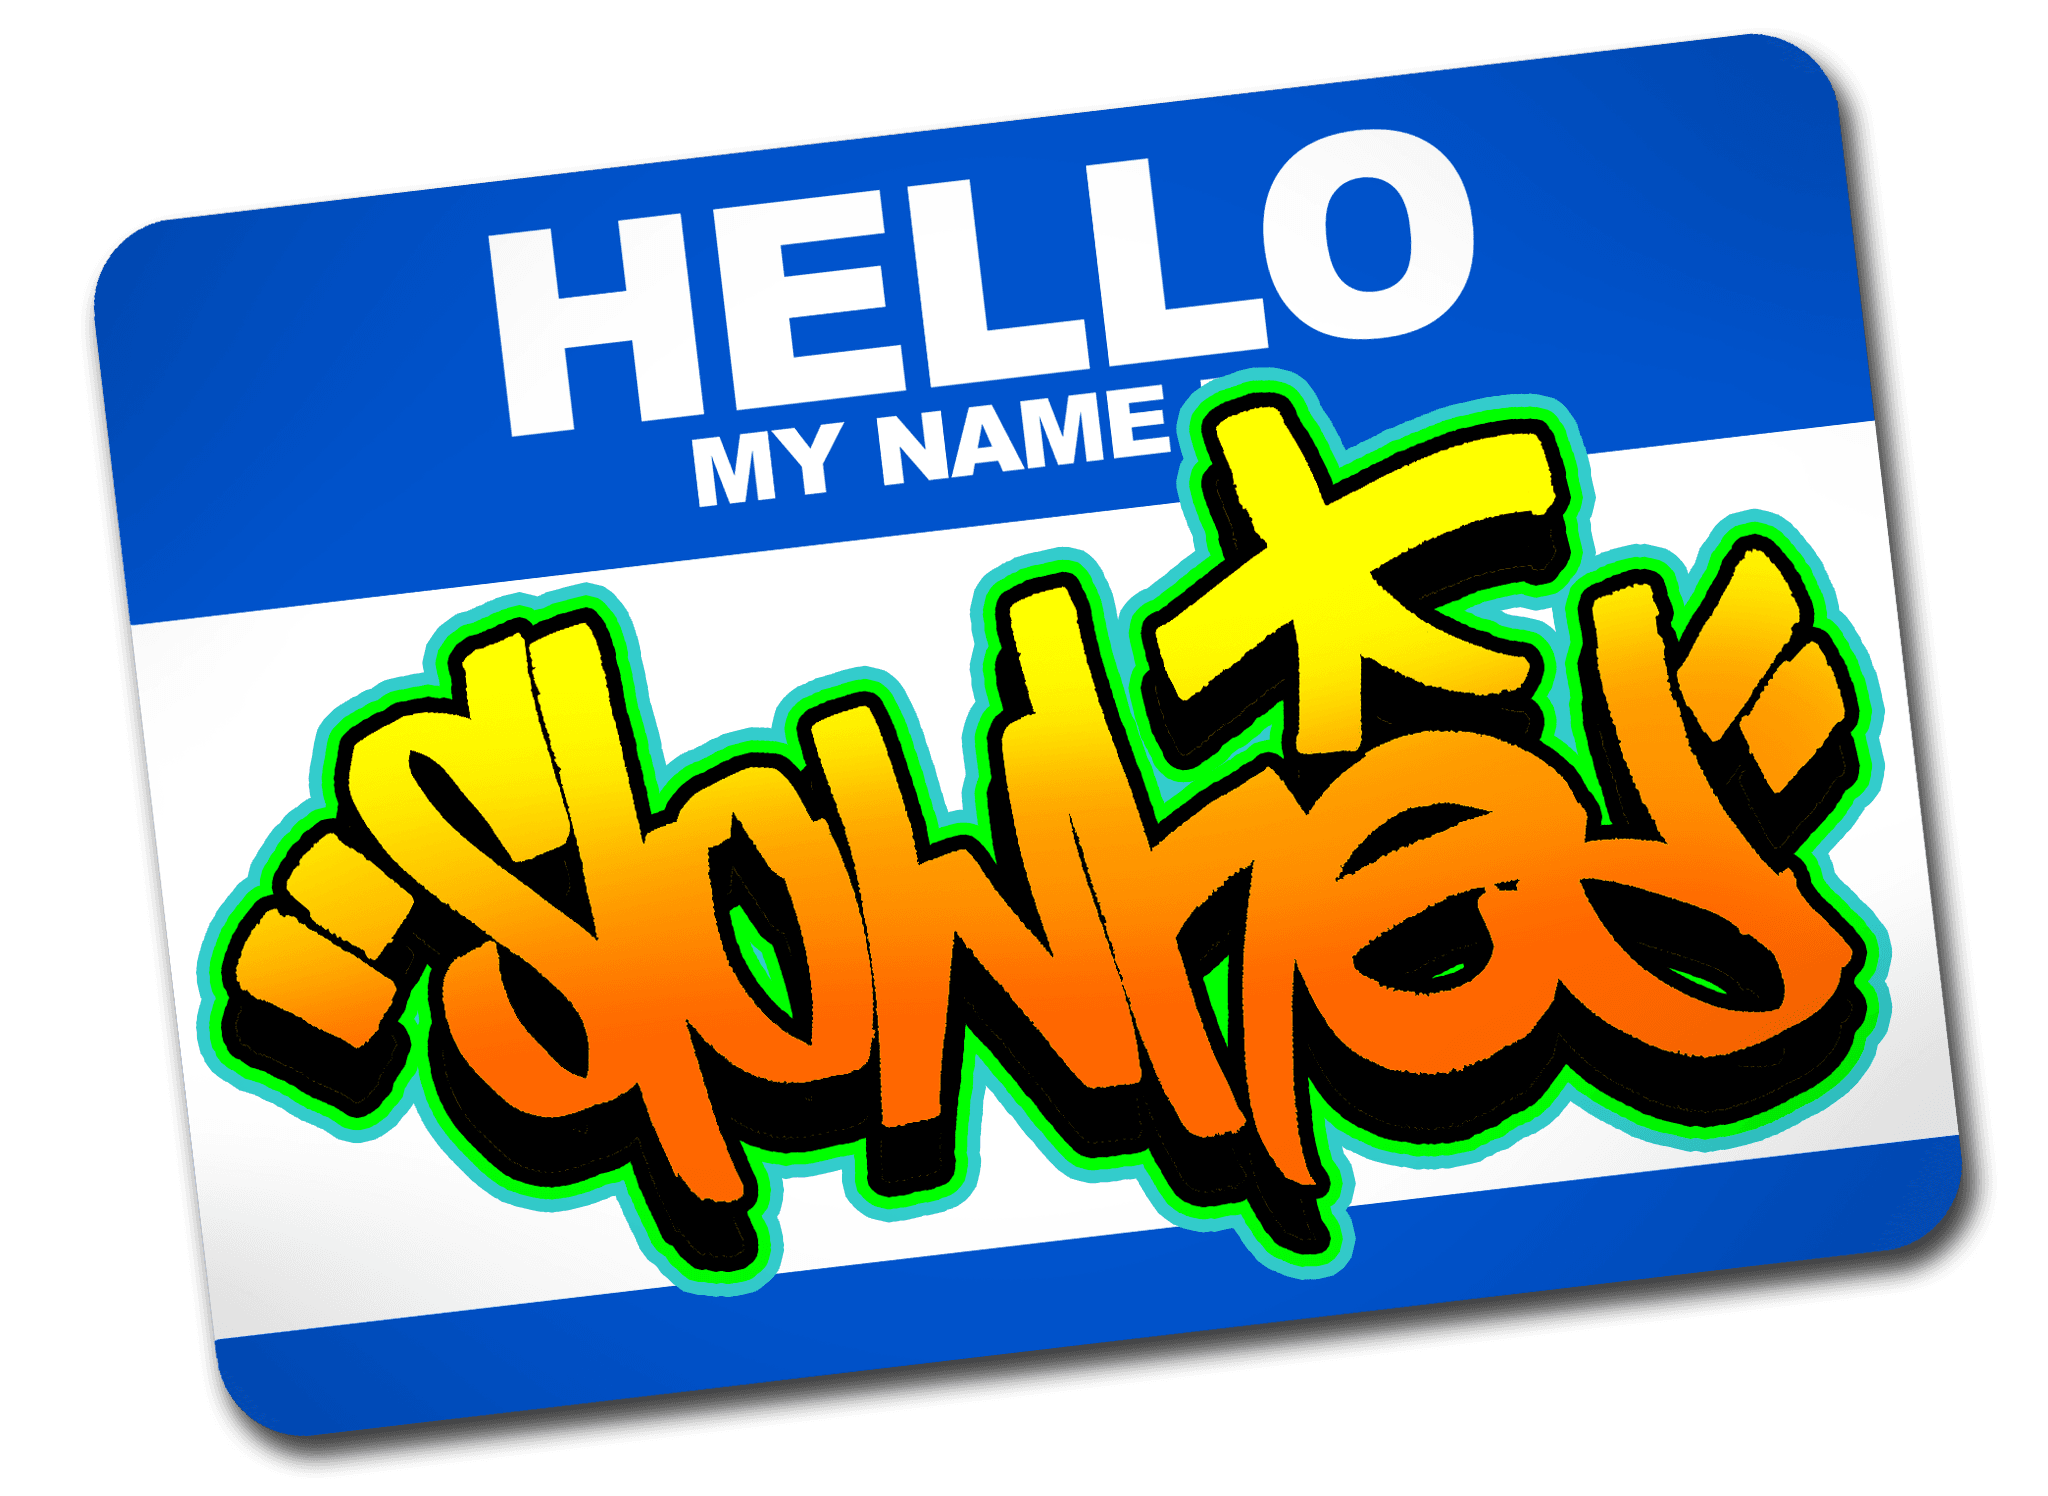 HELLO MY NAME IS SLOWHED